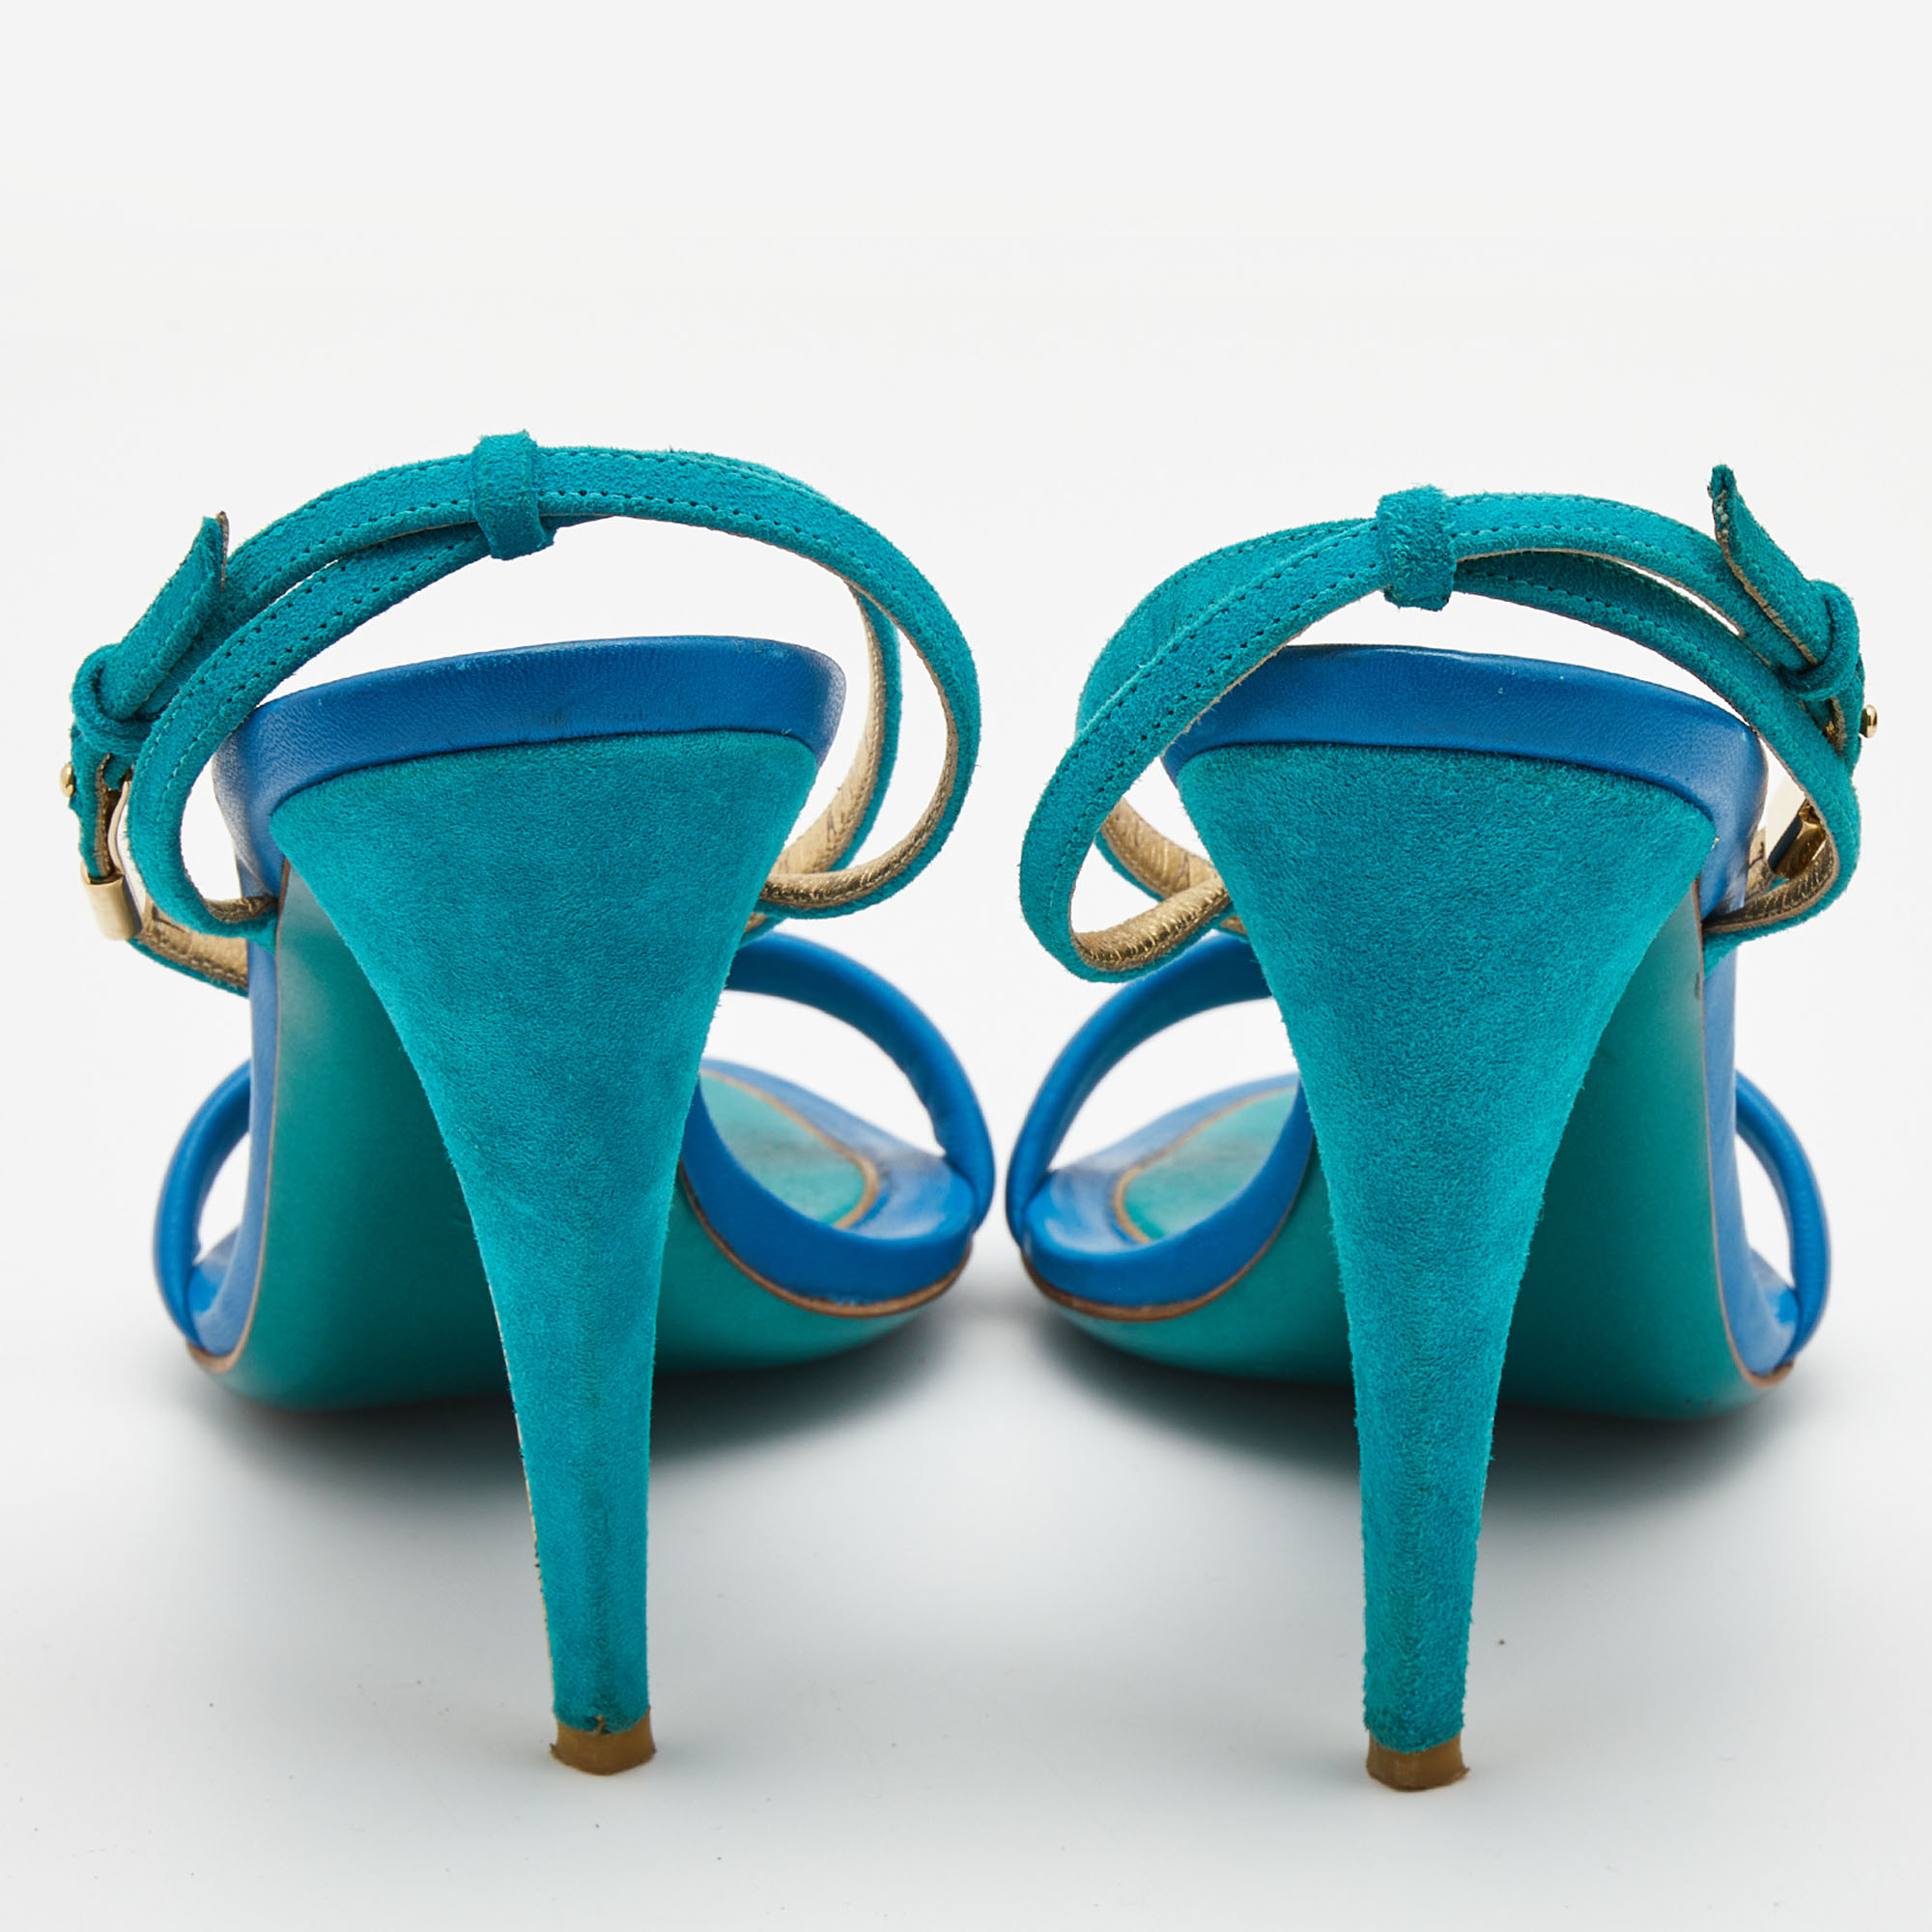 Salvatore Ferragamo Blue/Green Leather And Suede Ankle Strap Sandals Size 37.5